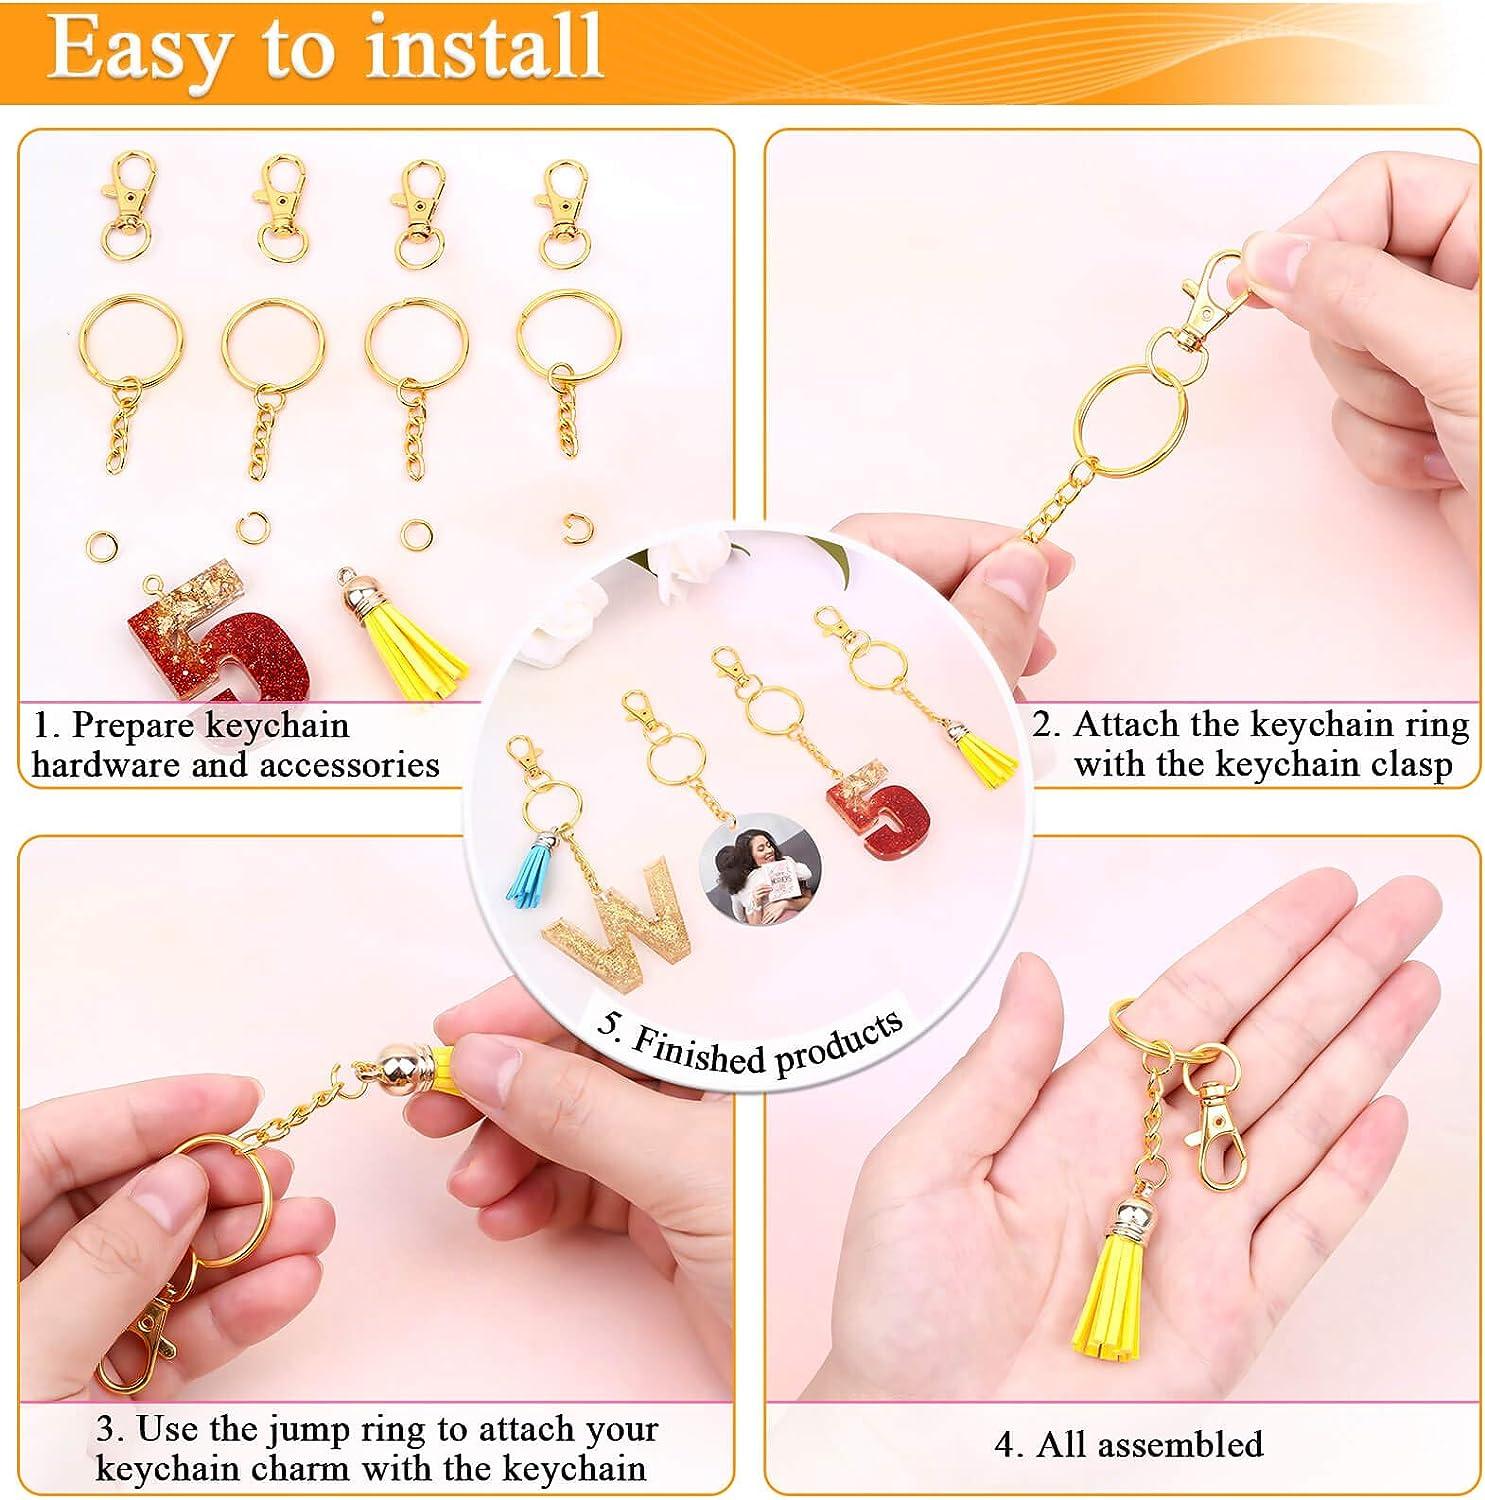 Gold Keychain Rings for Craft, Paxcoo 100pcs Keychain Hardware Kit Includes  50Pcs Key Chain Hooks and 50pcs Key Rings, Bulk Keychain Making Supplies  for Resin Craft, Acrylic Blanks 